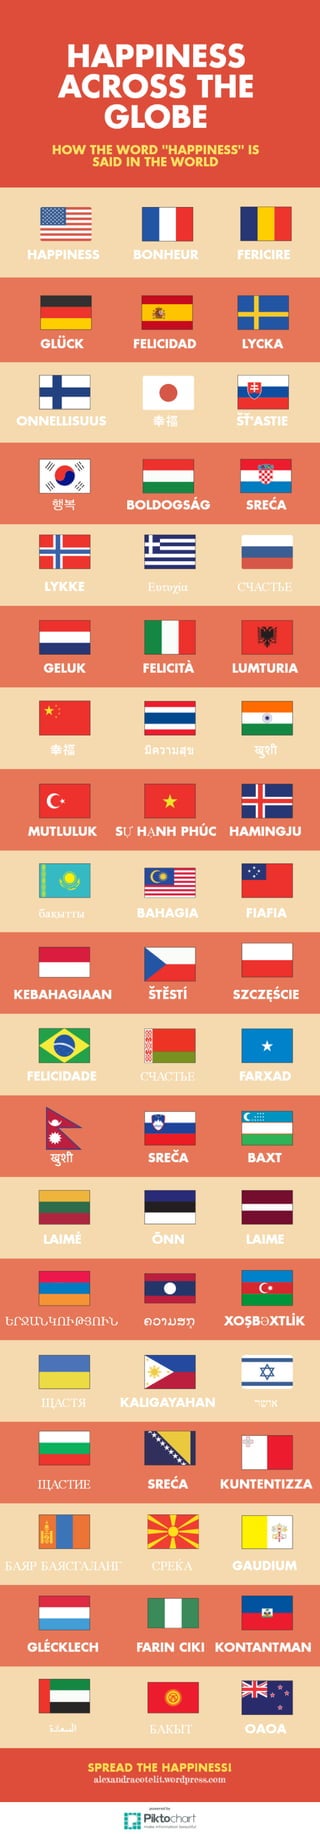 How the word "happiness" is said in 57 languages